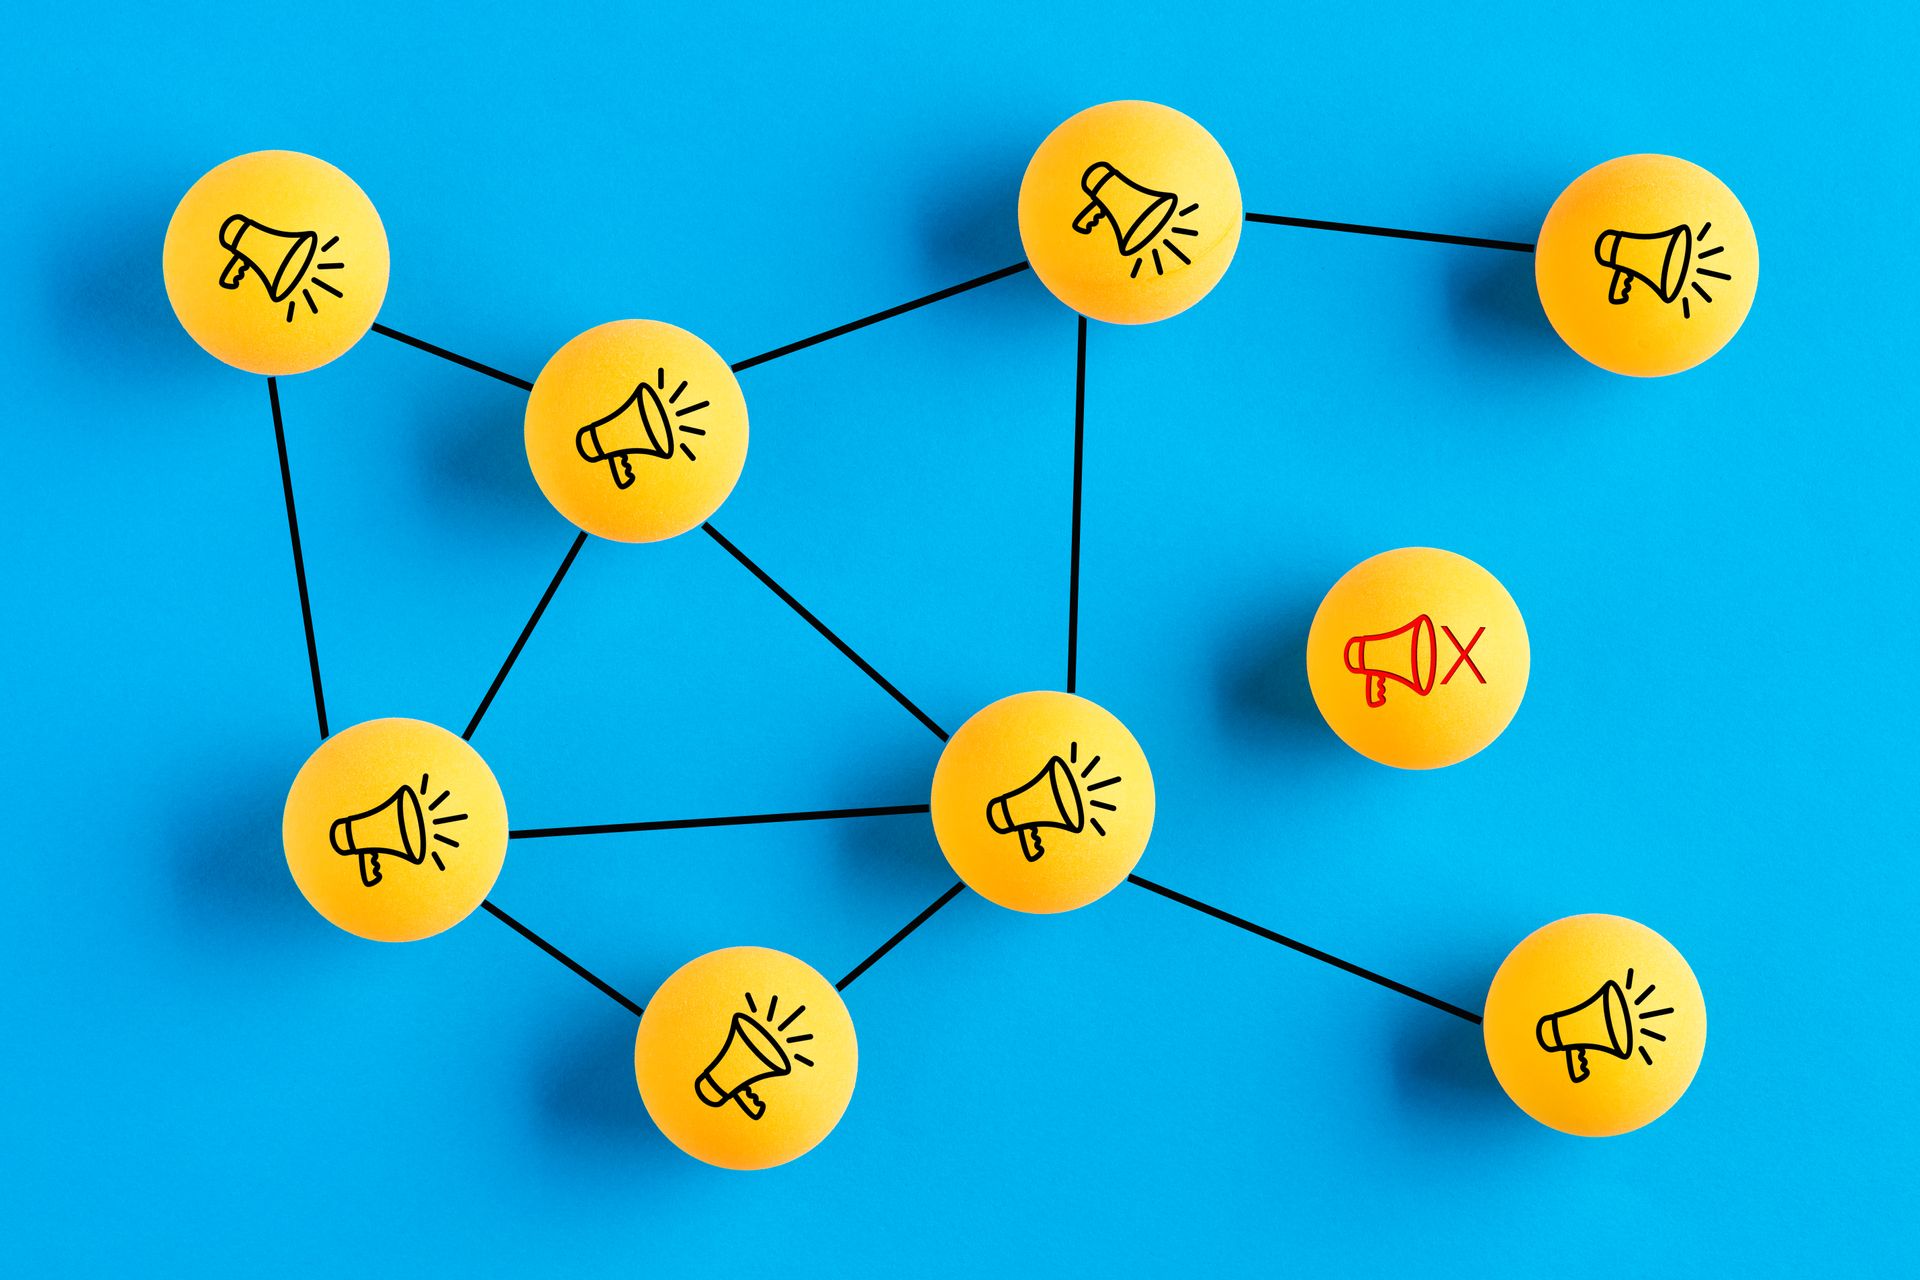 Network of yellow balls with megaphones on them, against a bright blue background